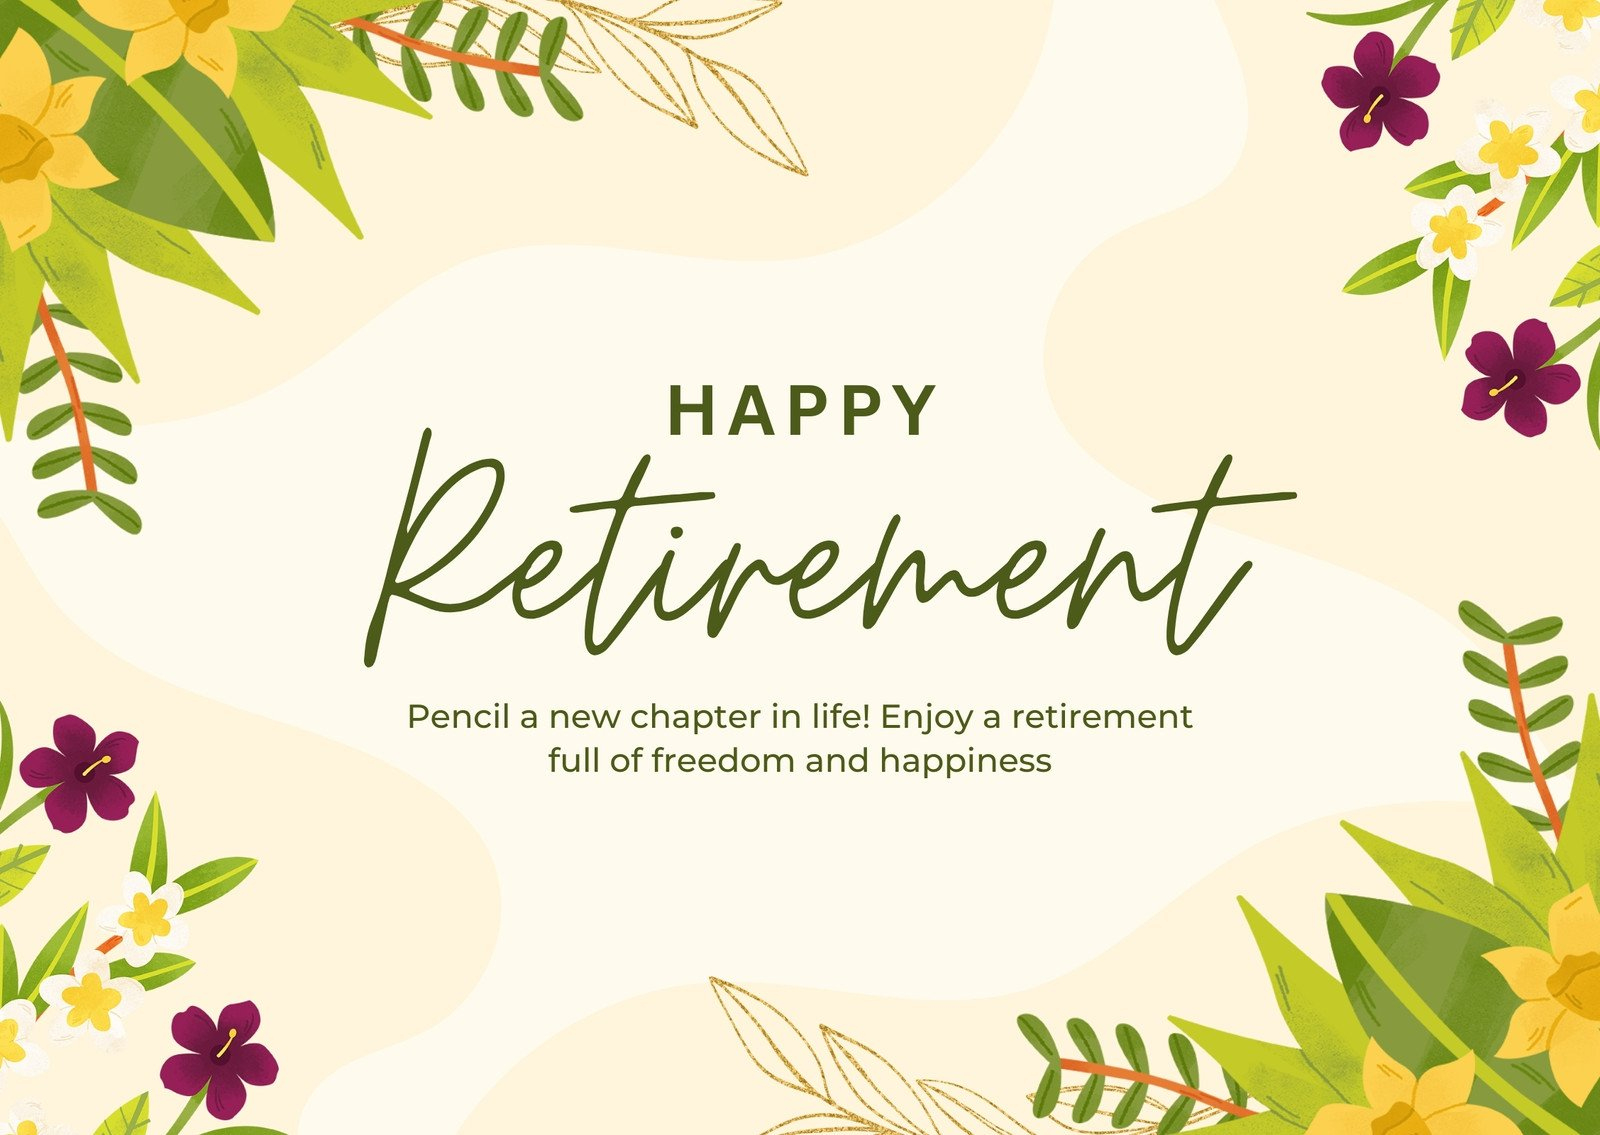 Free Printable, Customizable Retirement Card Templates | Canva intended for Free Printable Retirement Cards